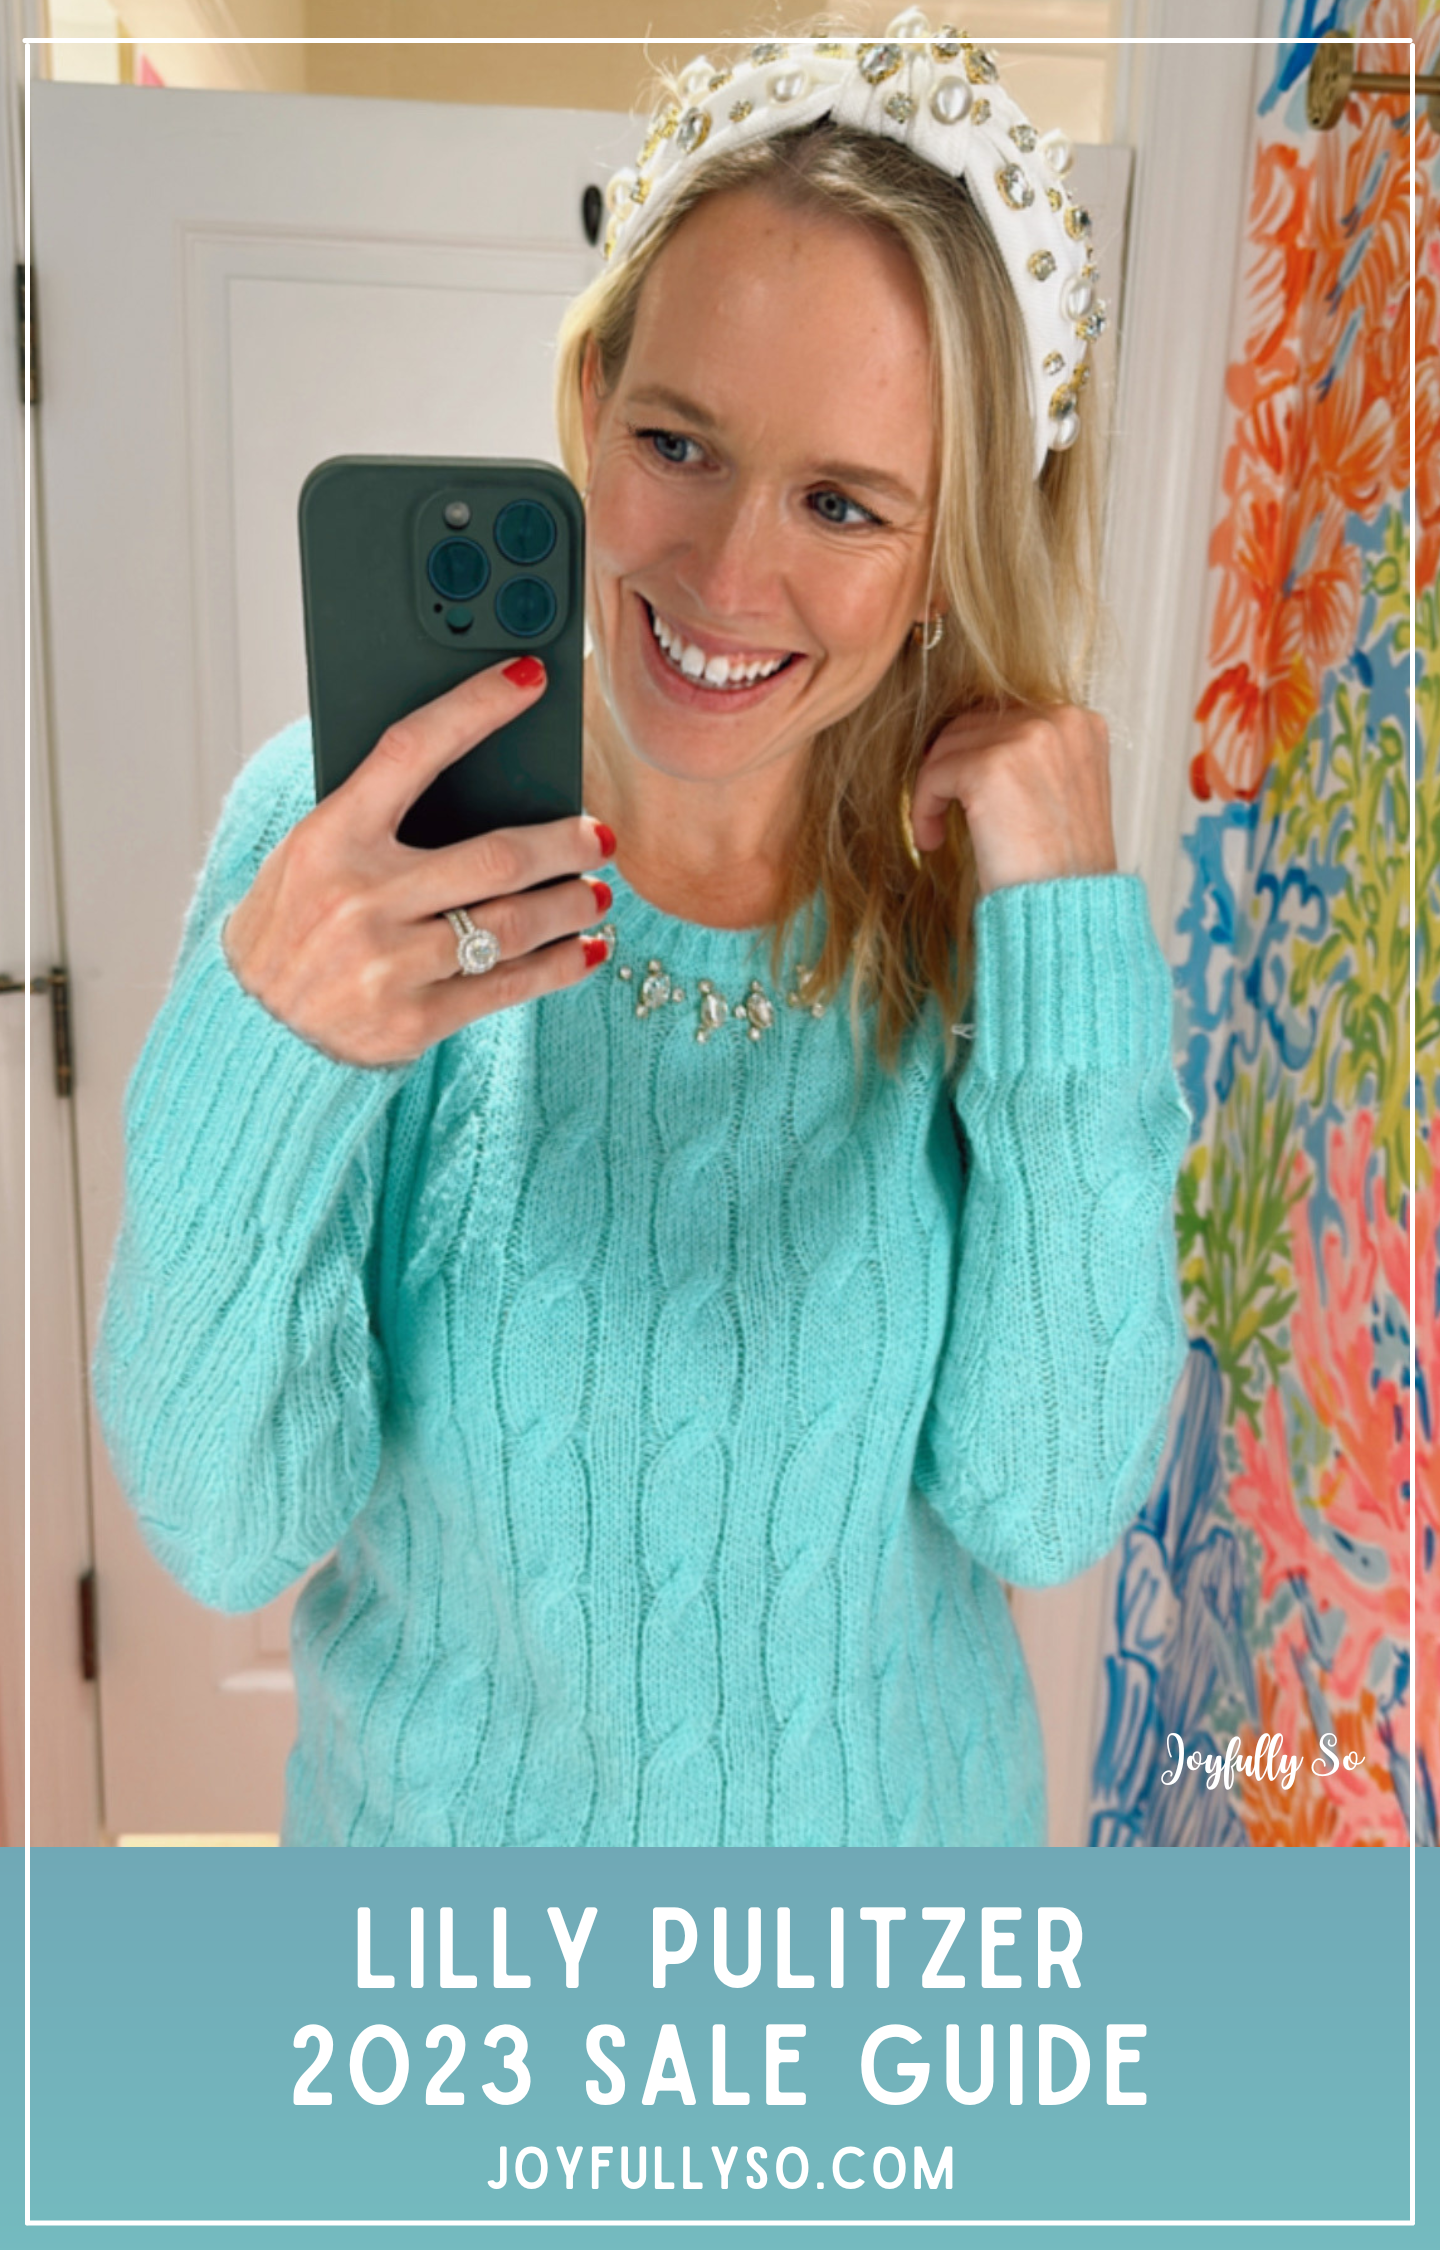 Lilly Pulitzer Sale sweater | Find out what is on sale, specific sale prices and when we can expect the Lilly Pulitzer Sunshine Sale Winter 2023 to begin online!